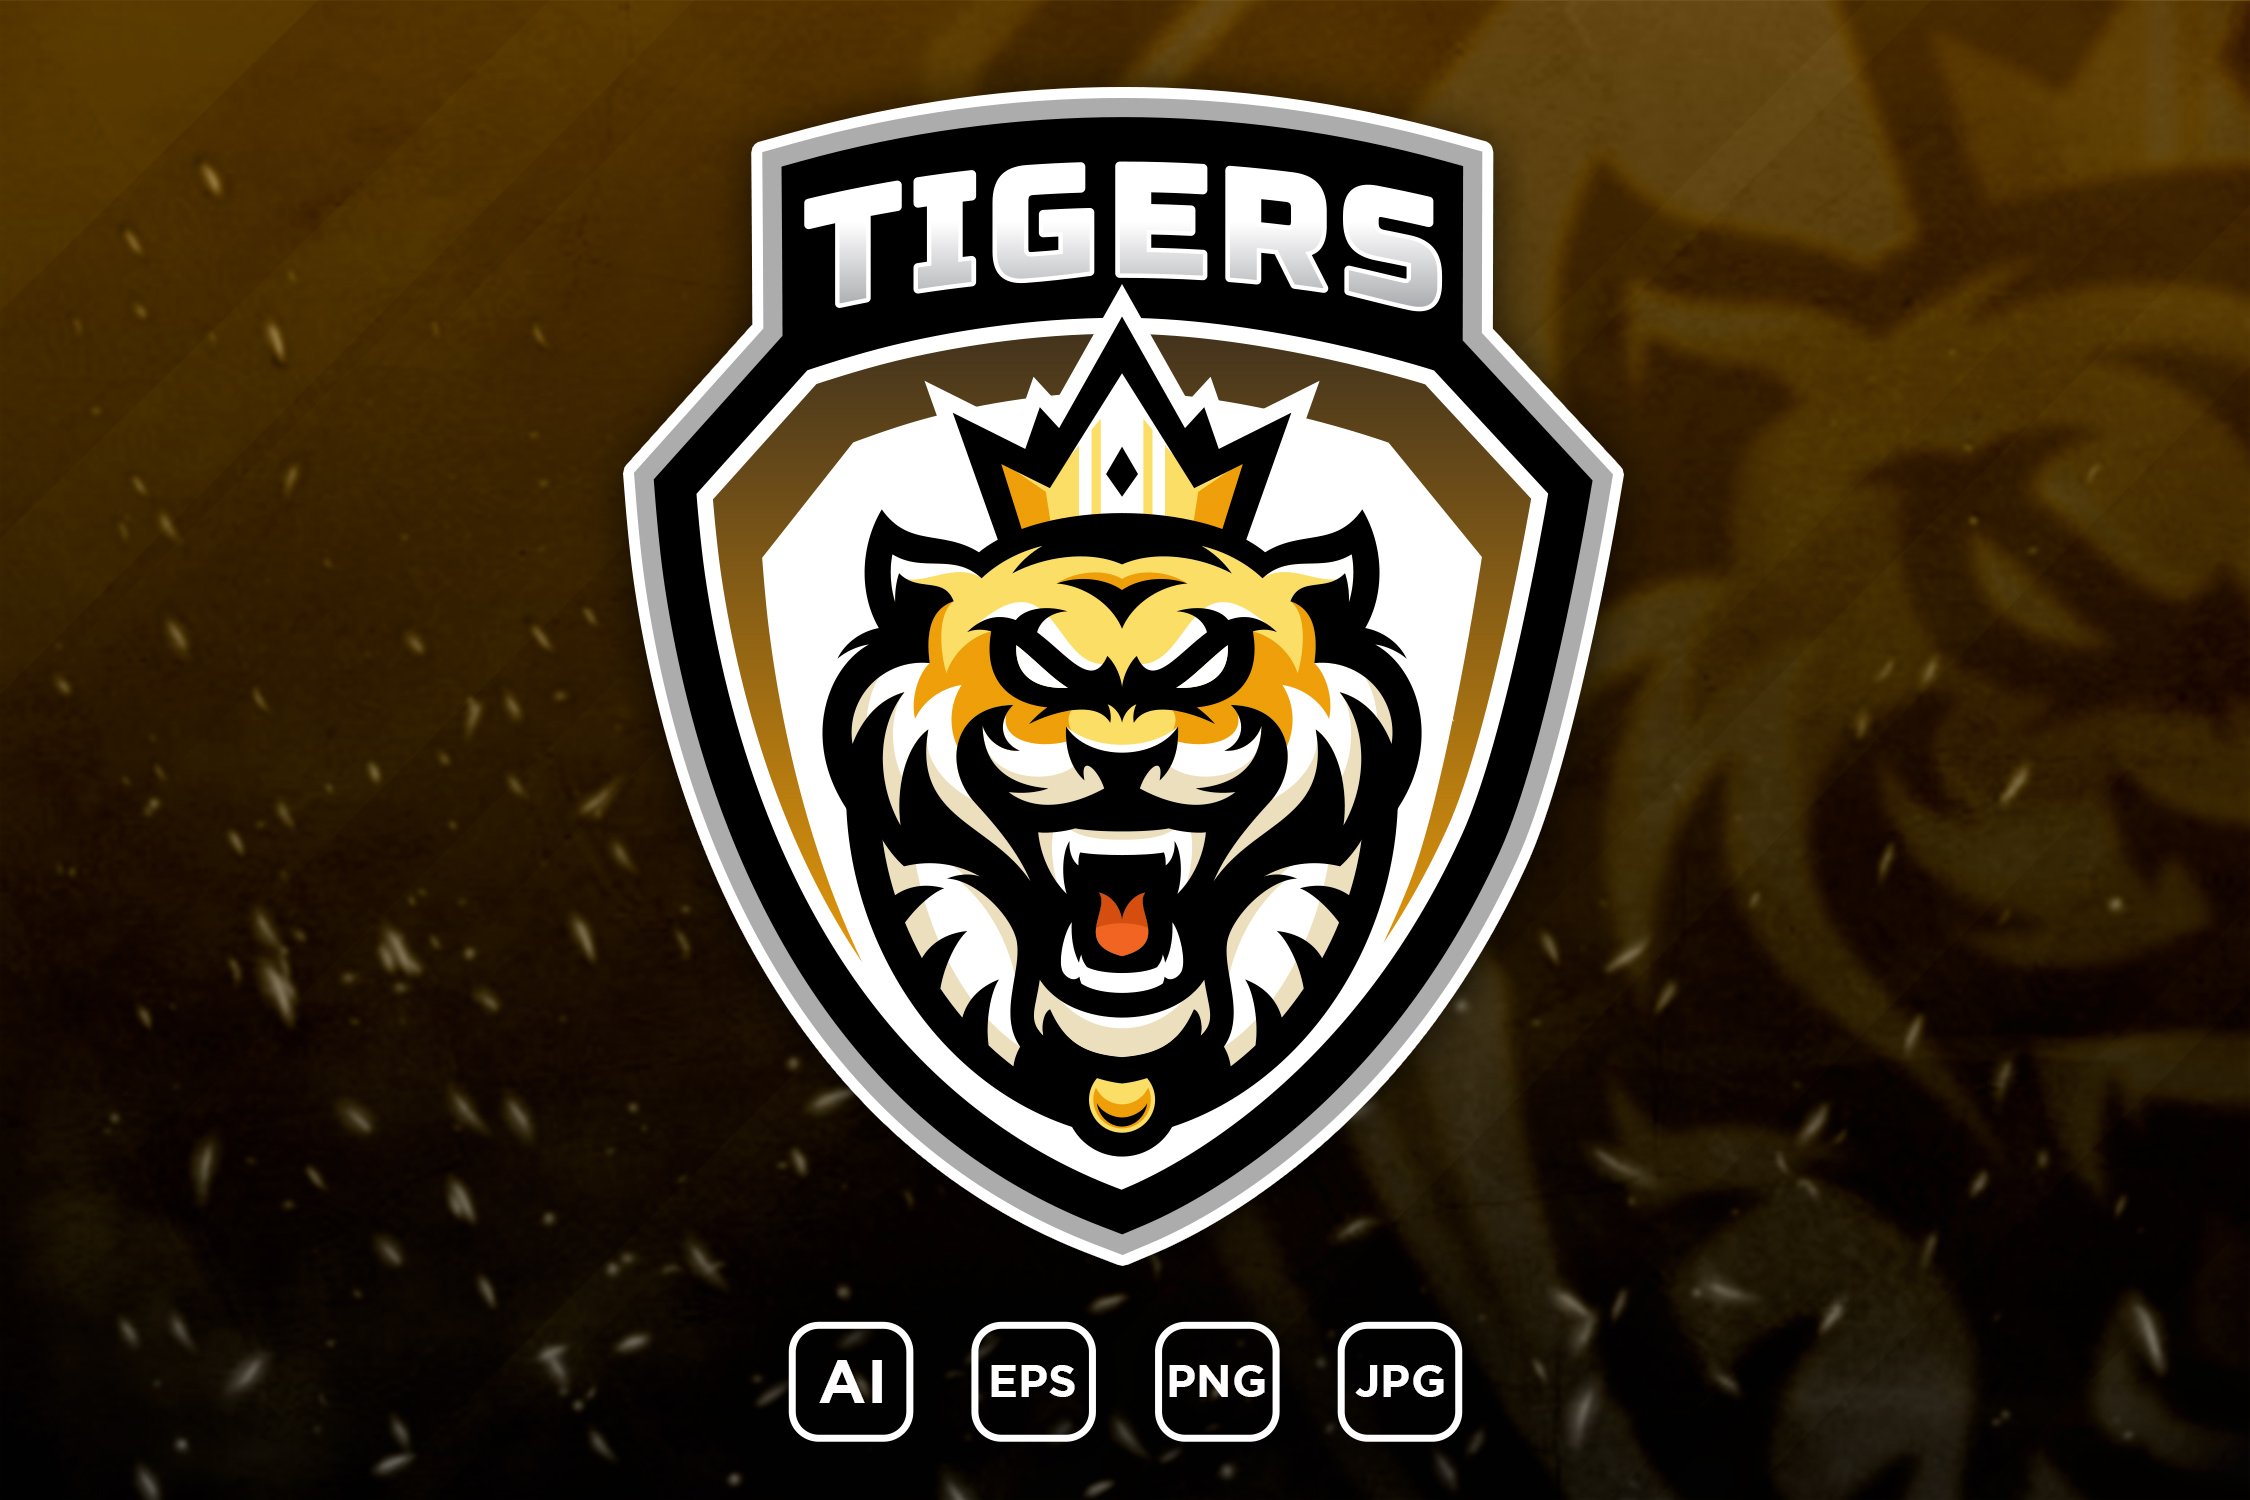 Tigers - mascot logo for a team cover image.